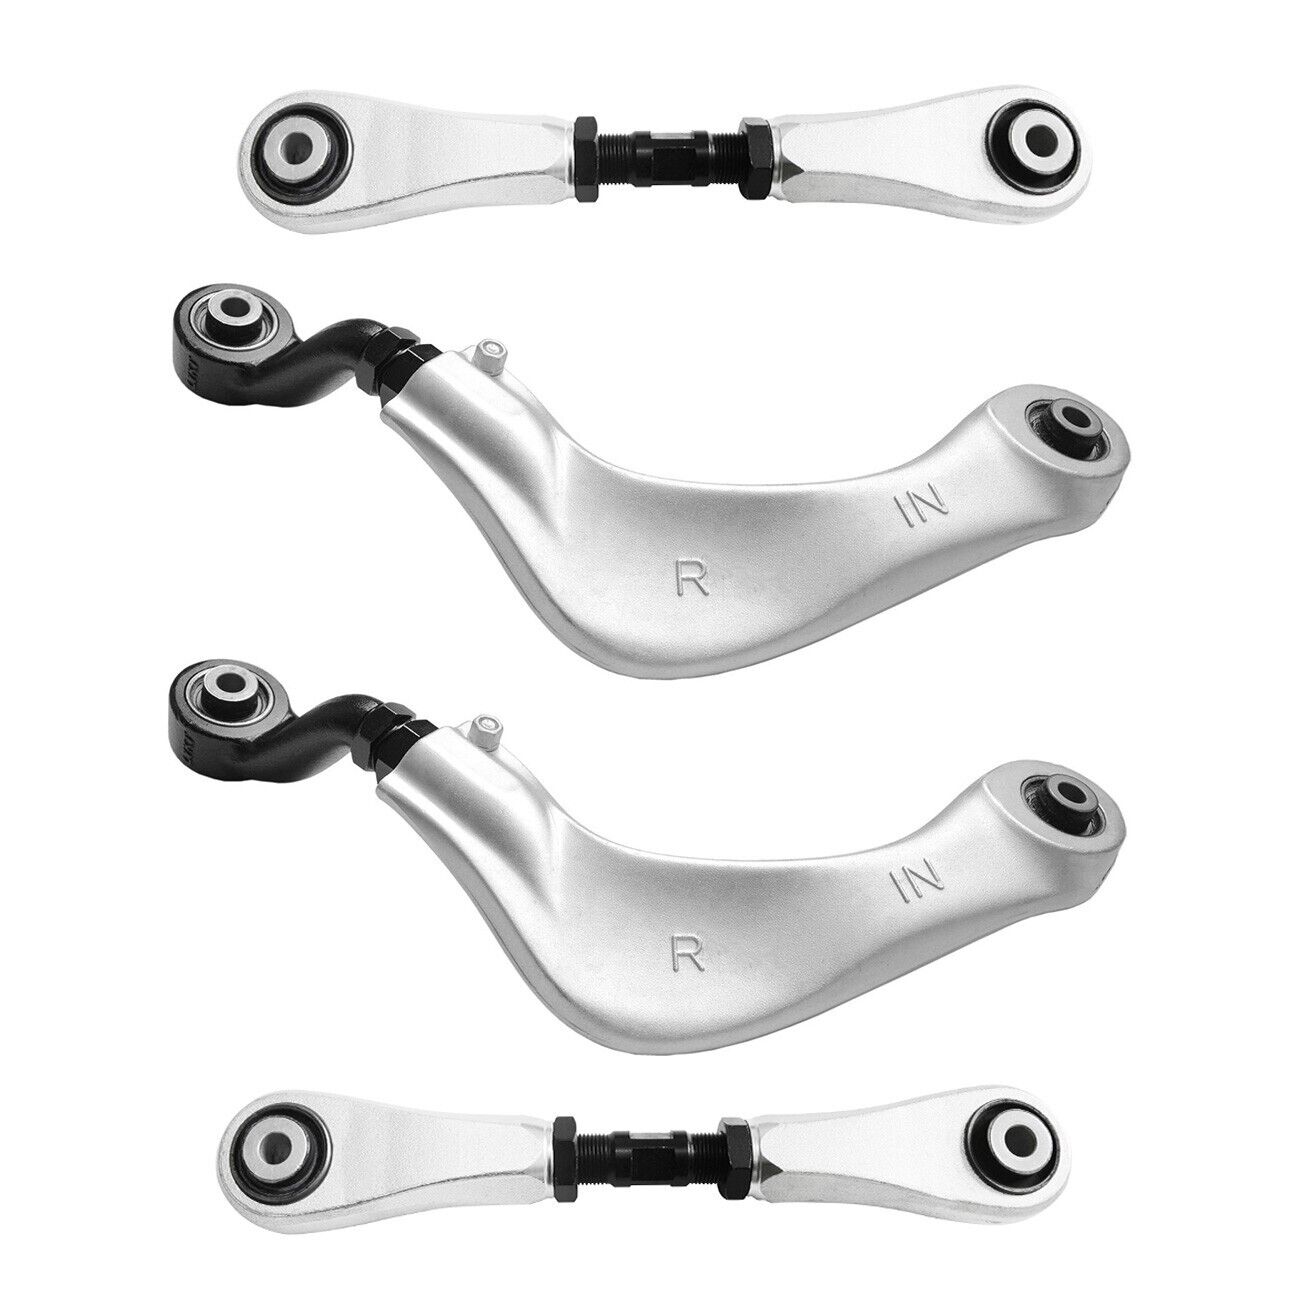 4pcs Adjustable Rear Camber Arms For Audi A4～A7、Q5、RS5/7、SQ5、S4～S8&Porsche Macan